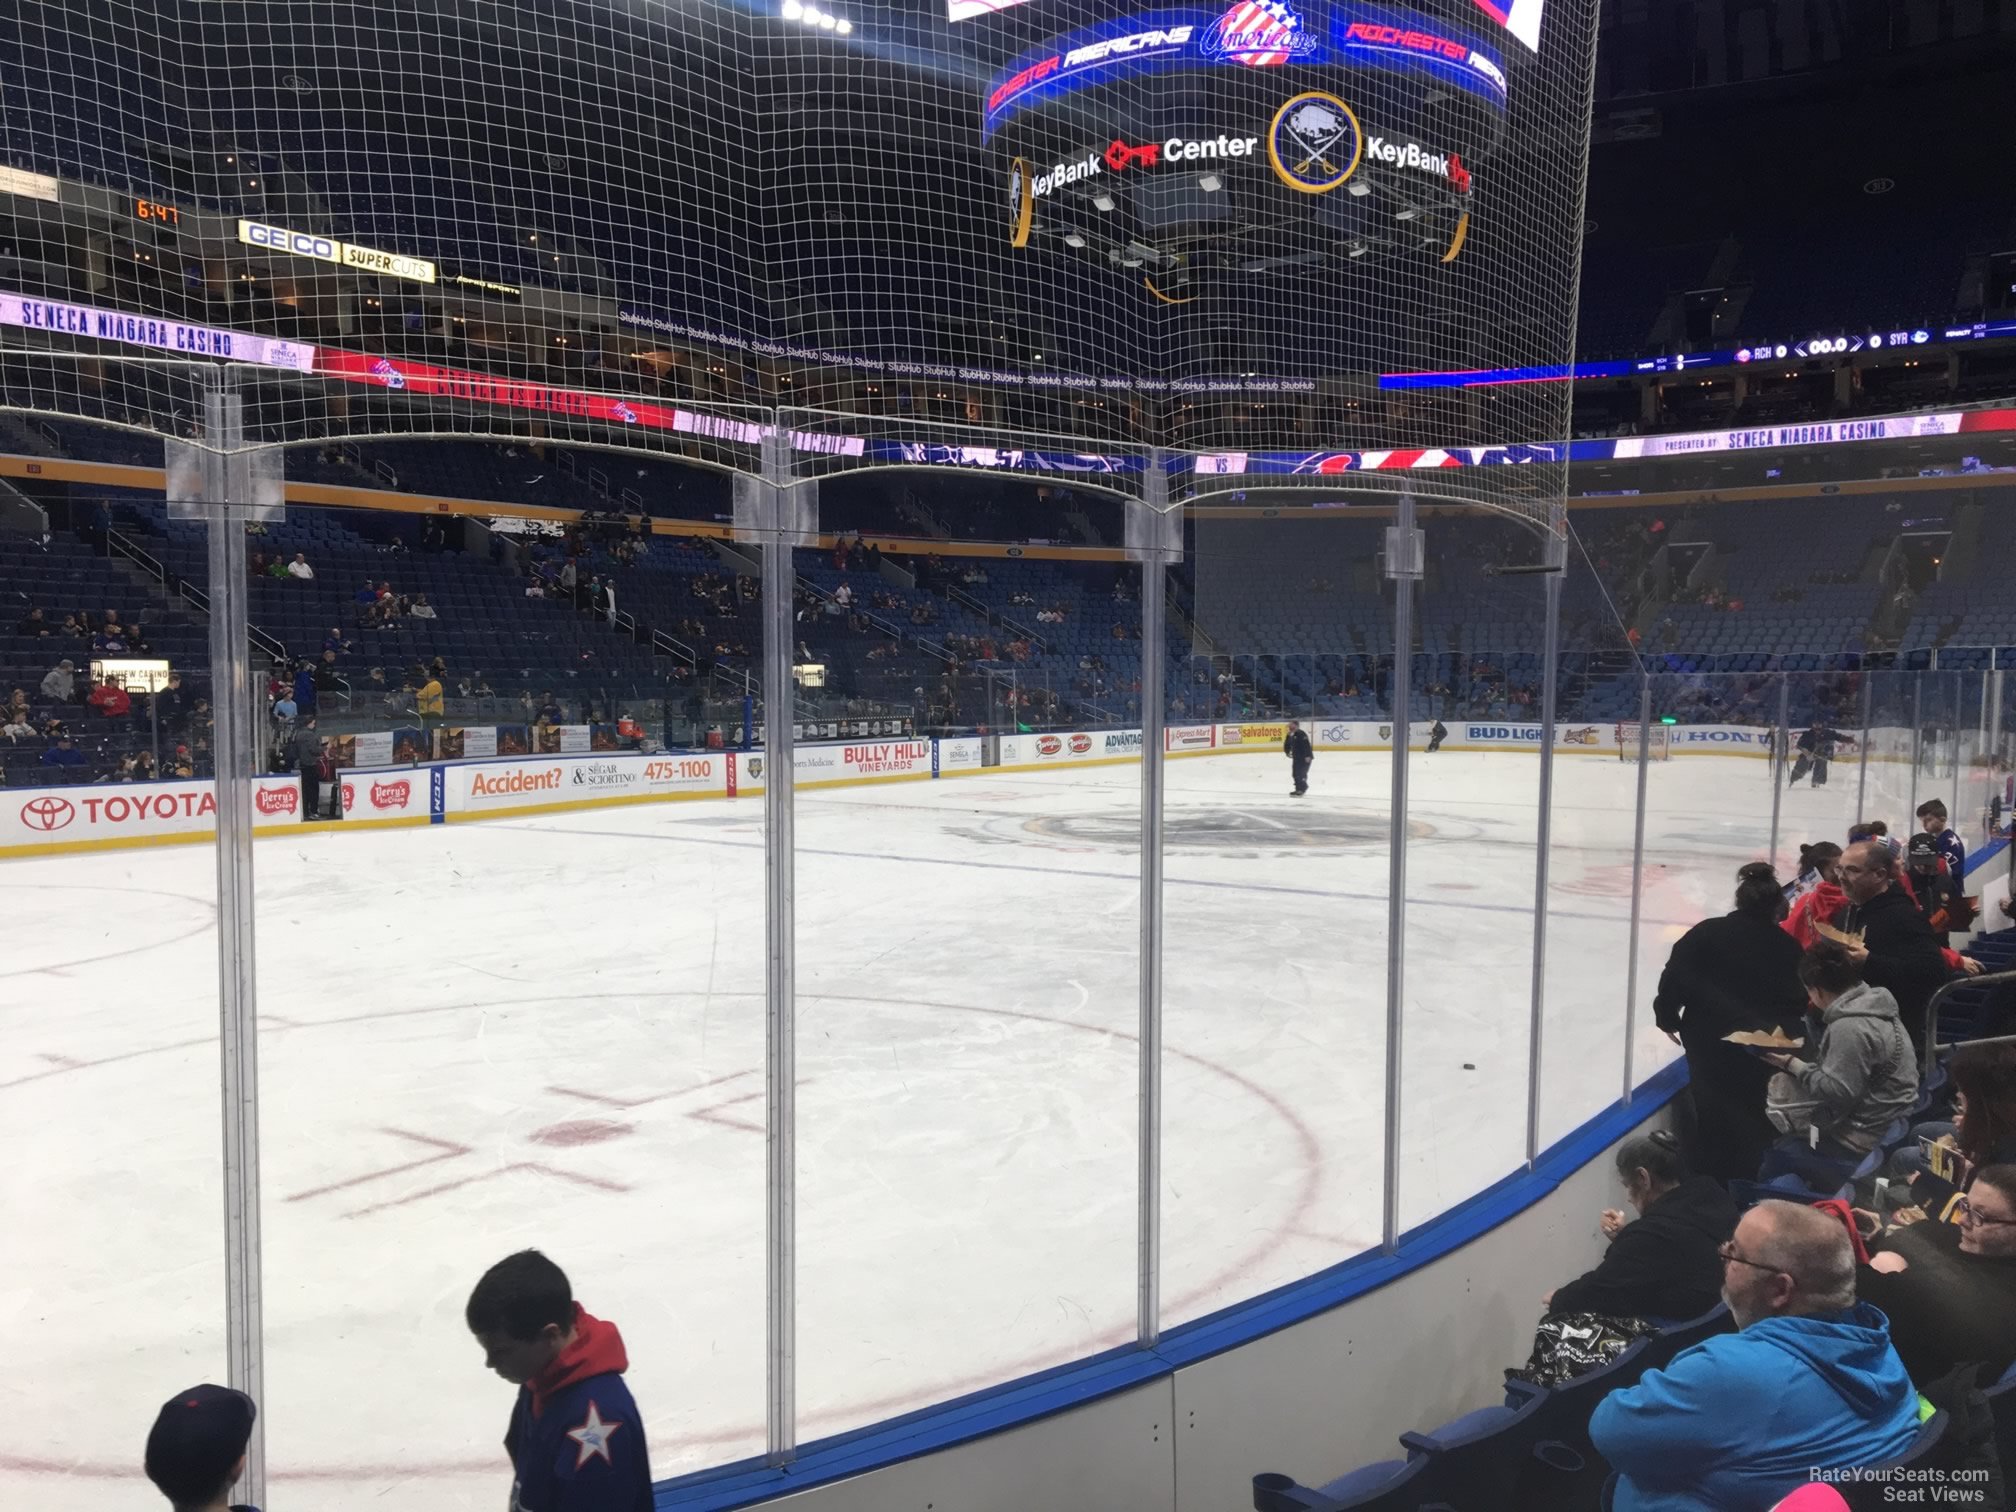 section 120, row 4 seat view  for hockey - keybank center